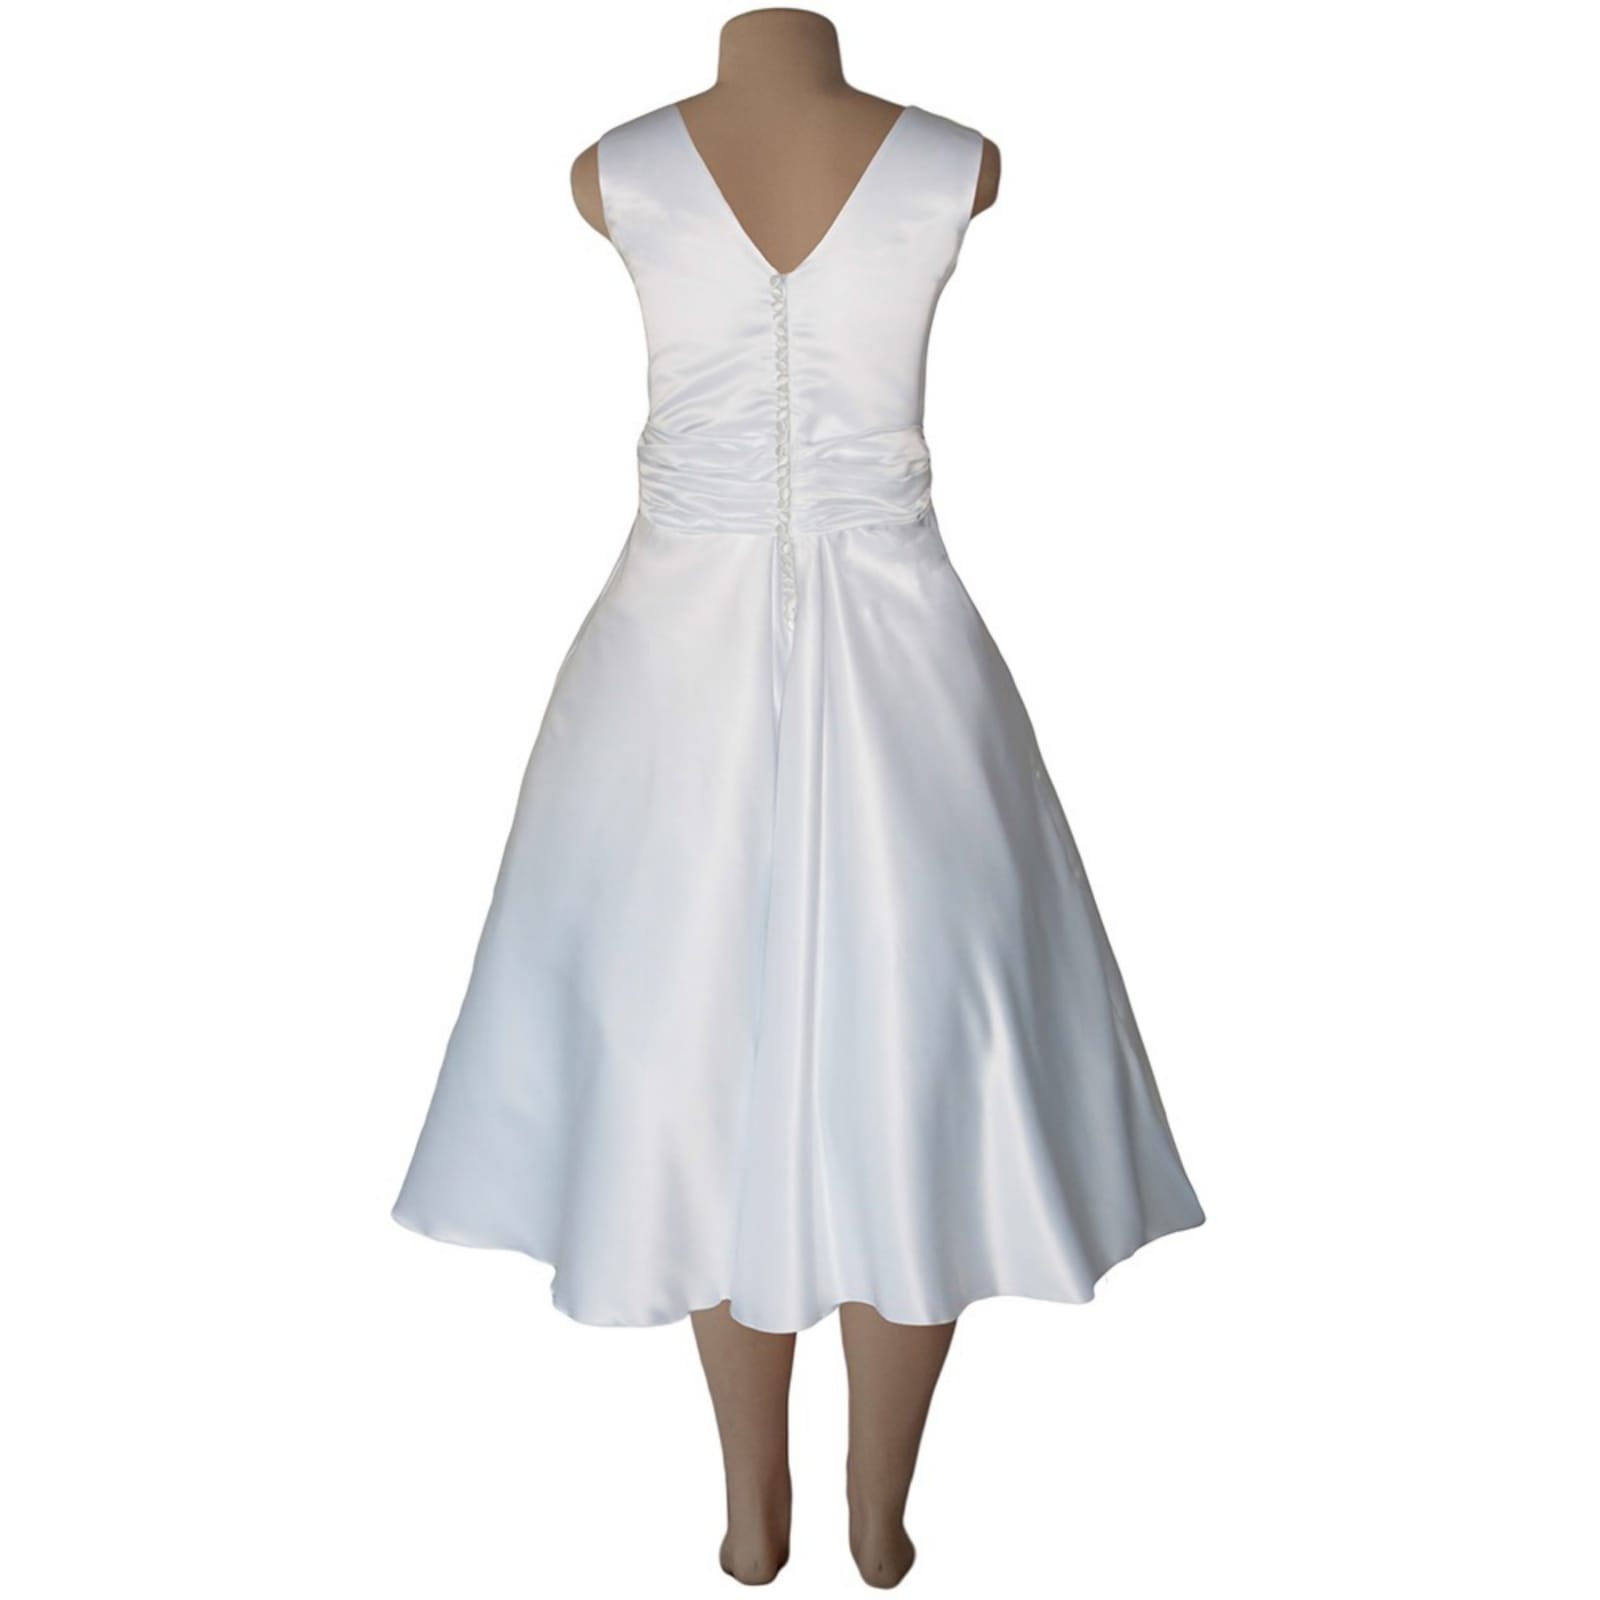 White satin 3/4 length v neck custom made wedding dress 6 white satin 3/4 length v neck custom made wedding dress, with a cross bust effect, with a ruched belt detailed with silver bling. Back detailed with buttons. With a 3/4 sleeve rounded white bolero.